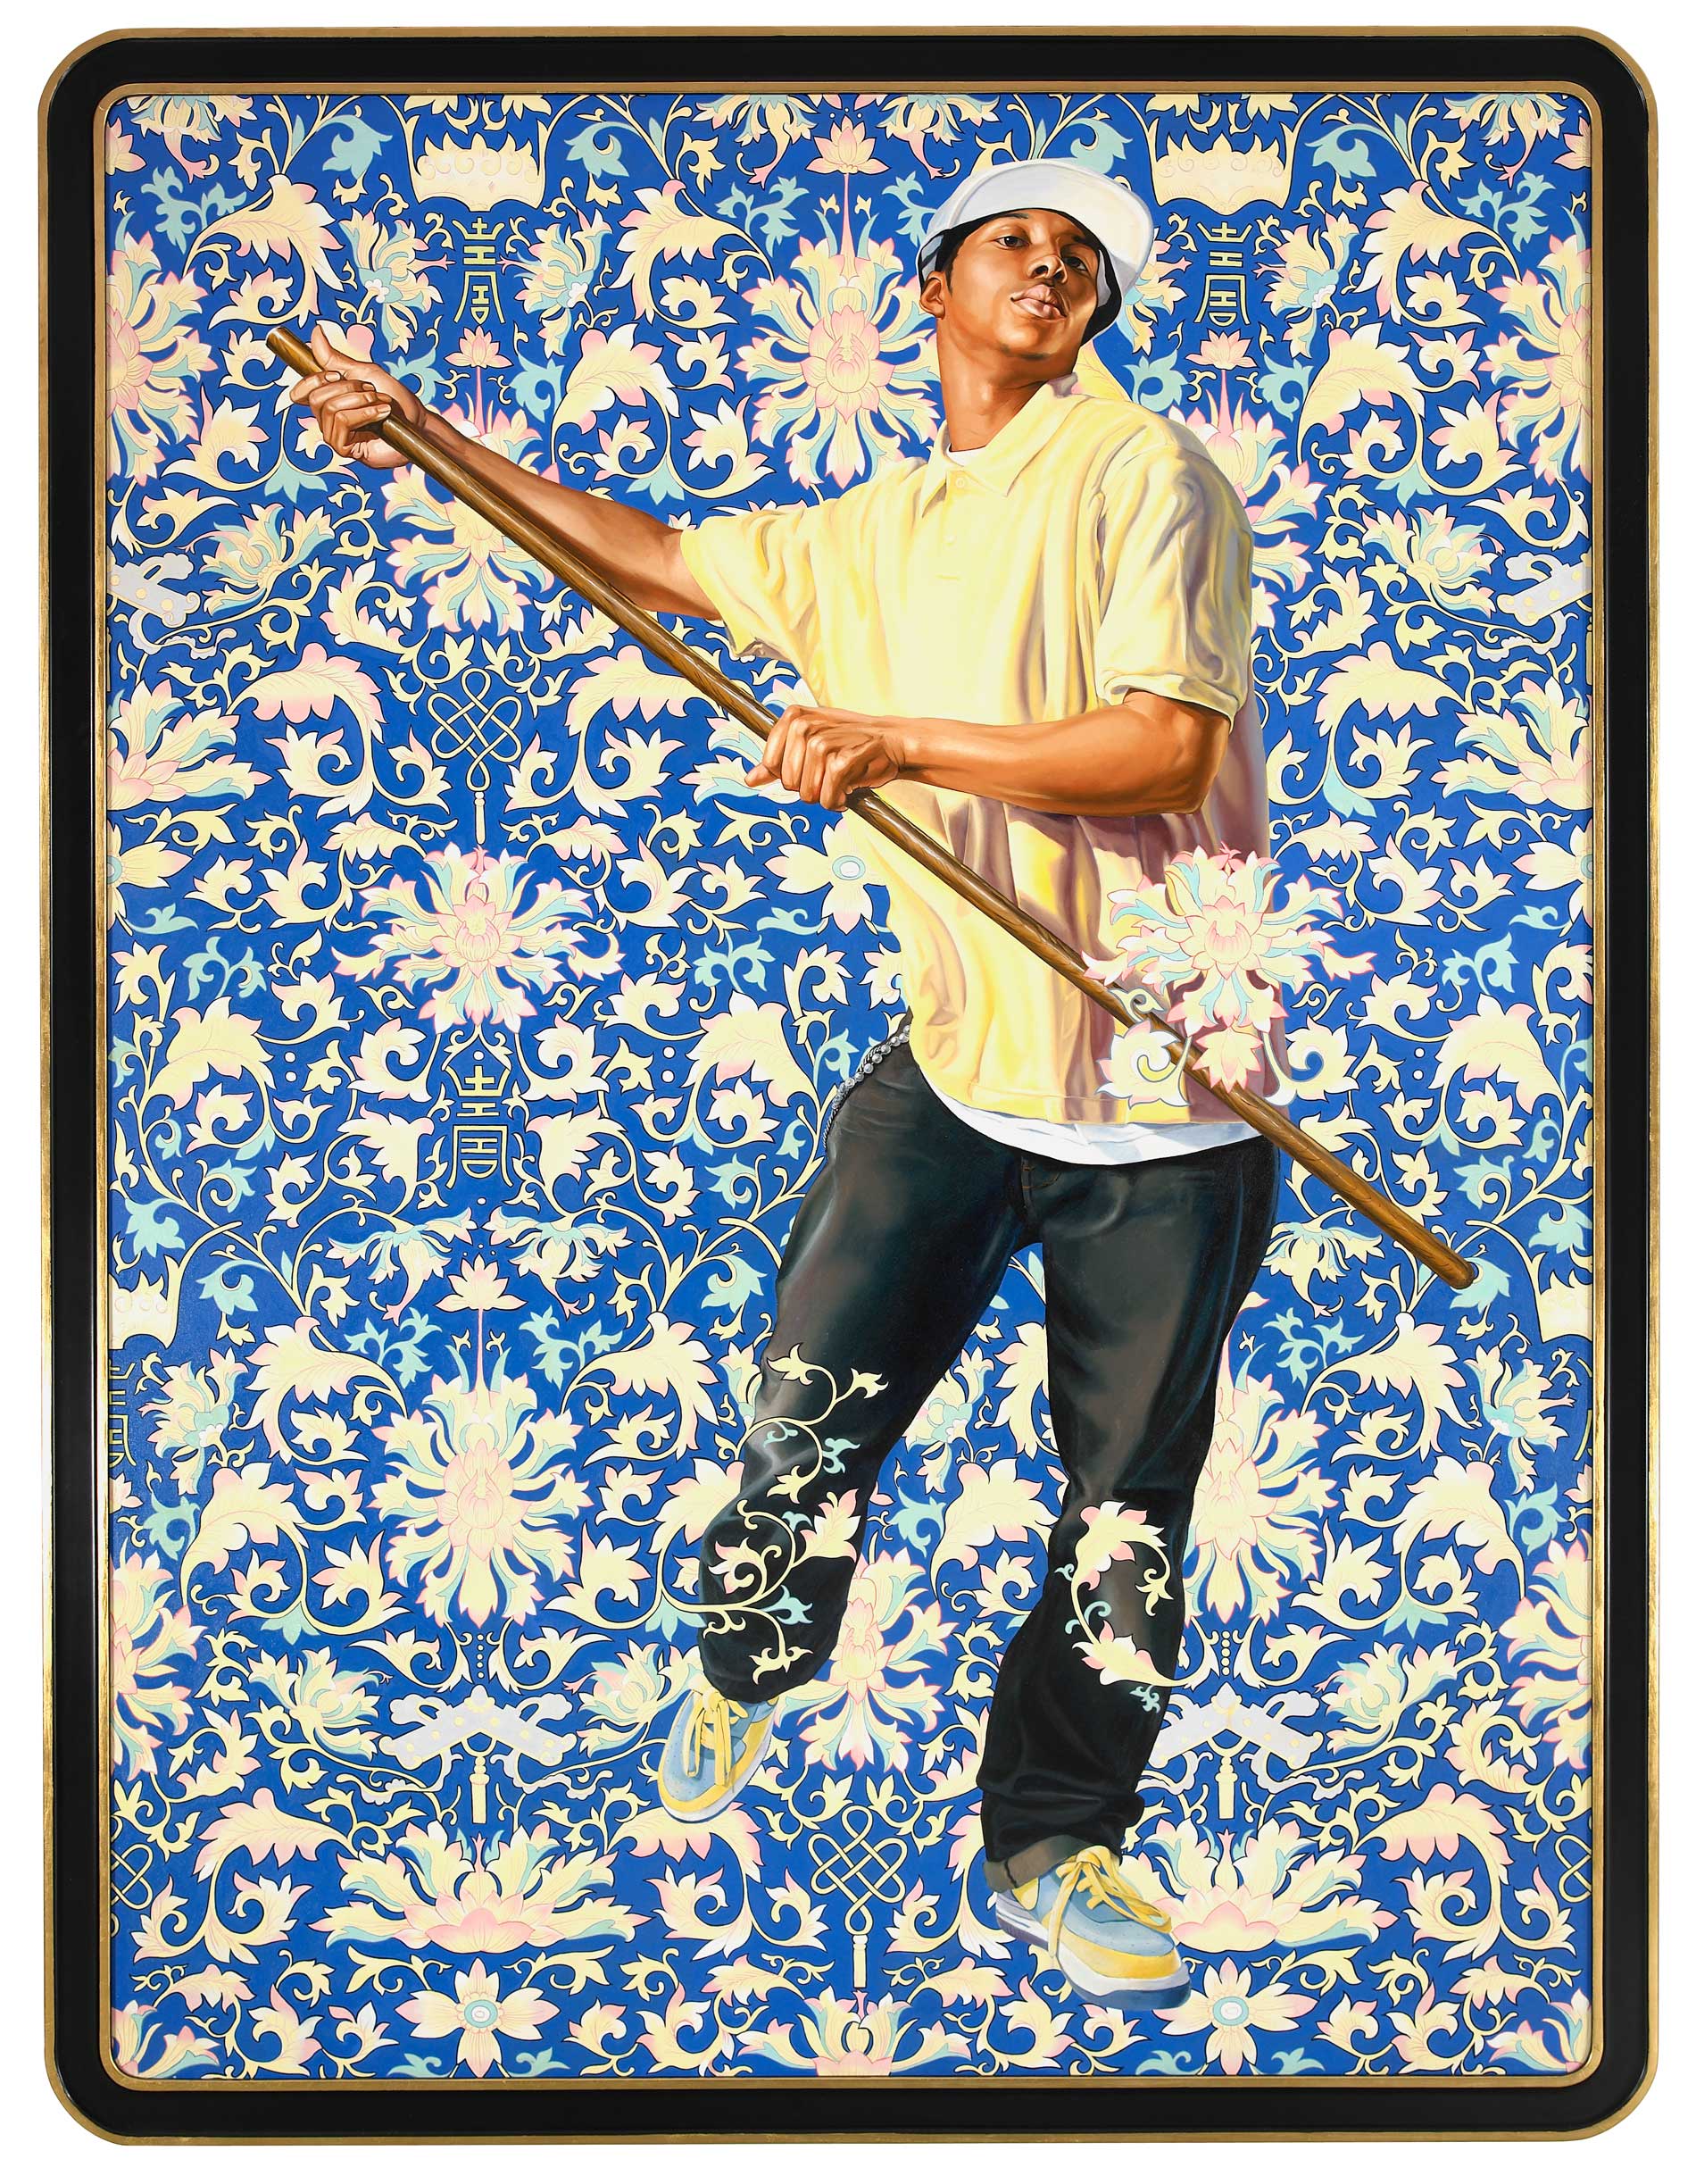 Kehinde Wiley | The World Stage: China | Design for a Stained Glass Window with Wildman II, 2007 Oil on Canvas.  | 15